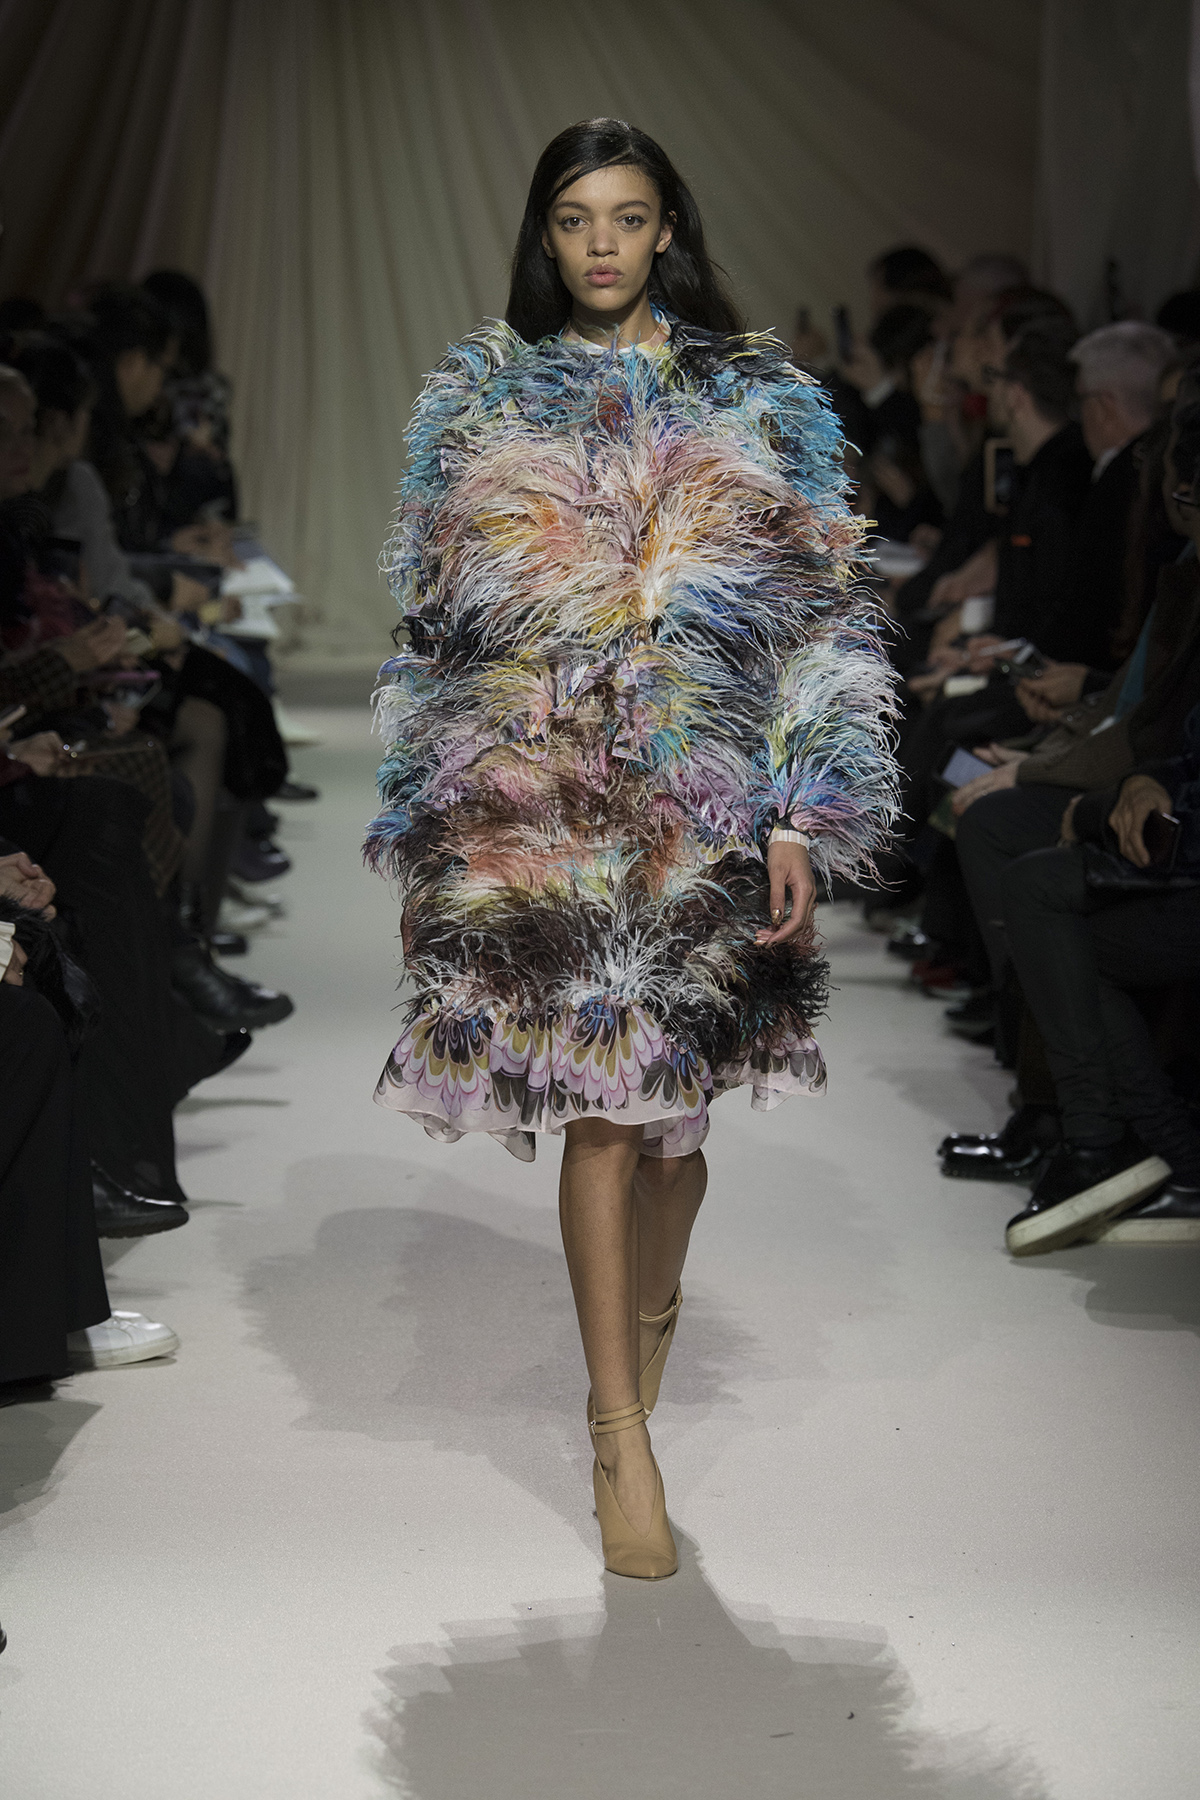 Model on the catwalk wearing a large multicoloured coat